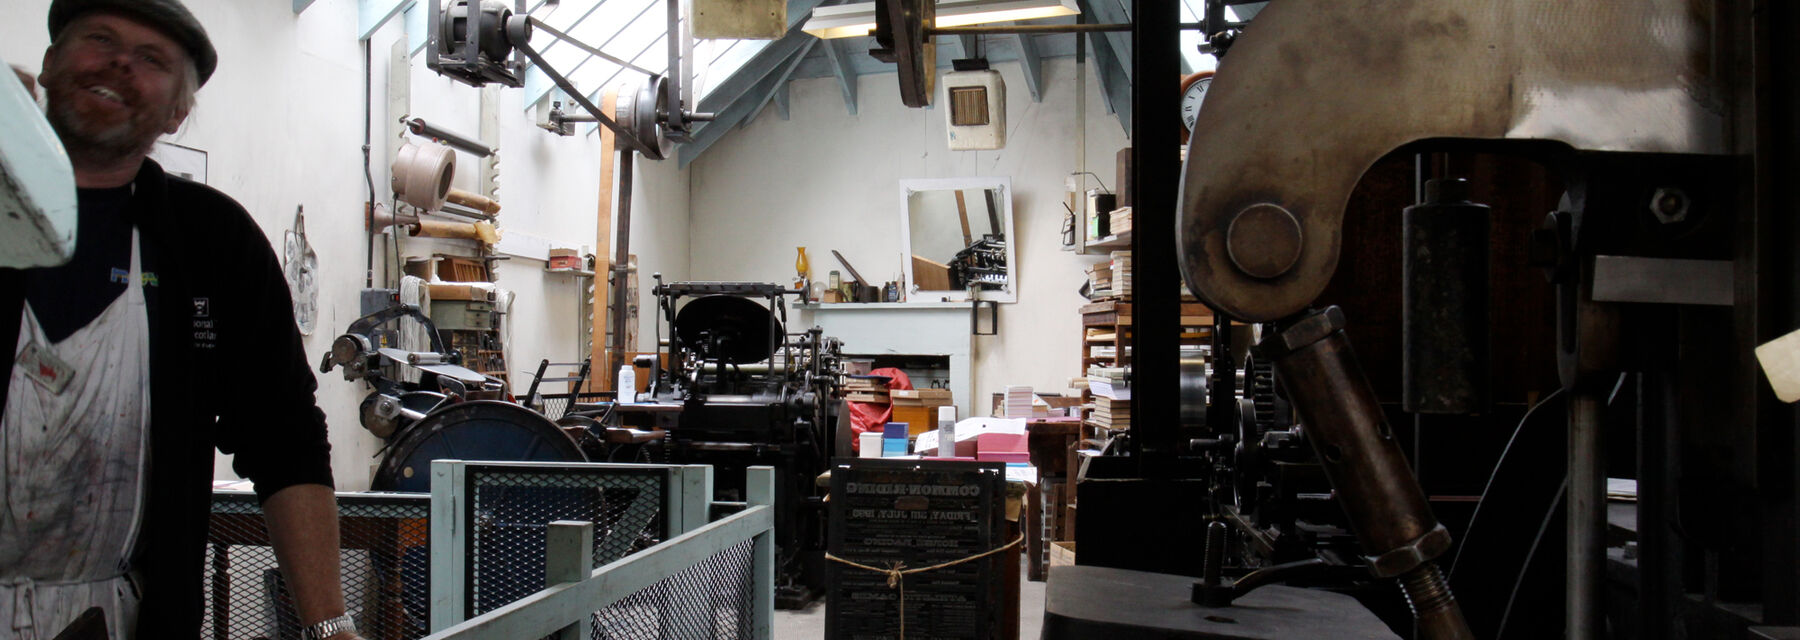 The workshop at Robert Smail's. A beamed roof lets in light, and the workshop is crammed with letterpress machinery and tools, some hanging from above. A man leans on a rail.